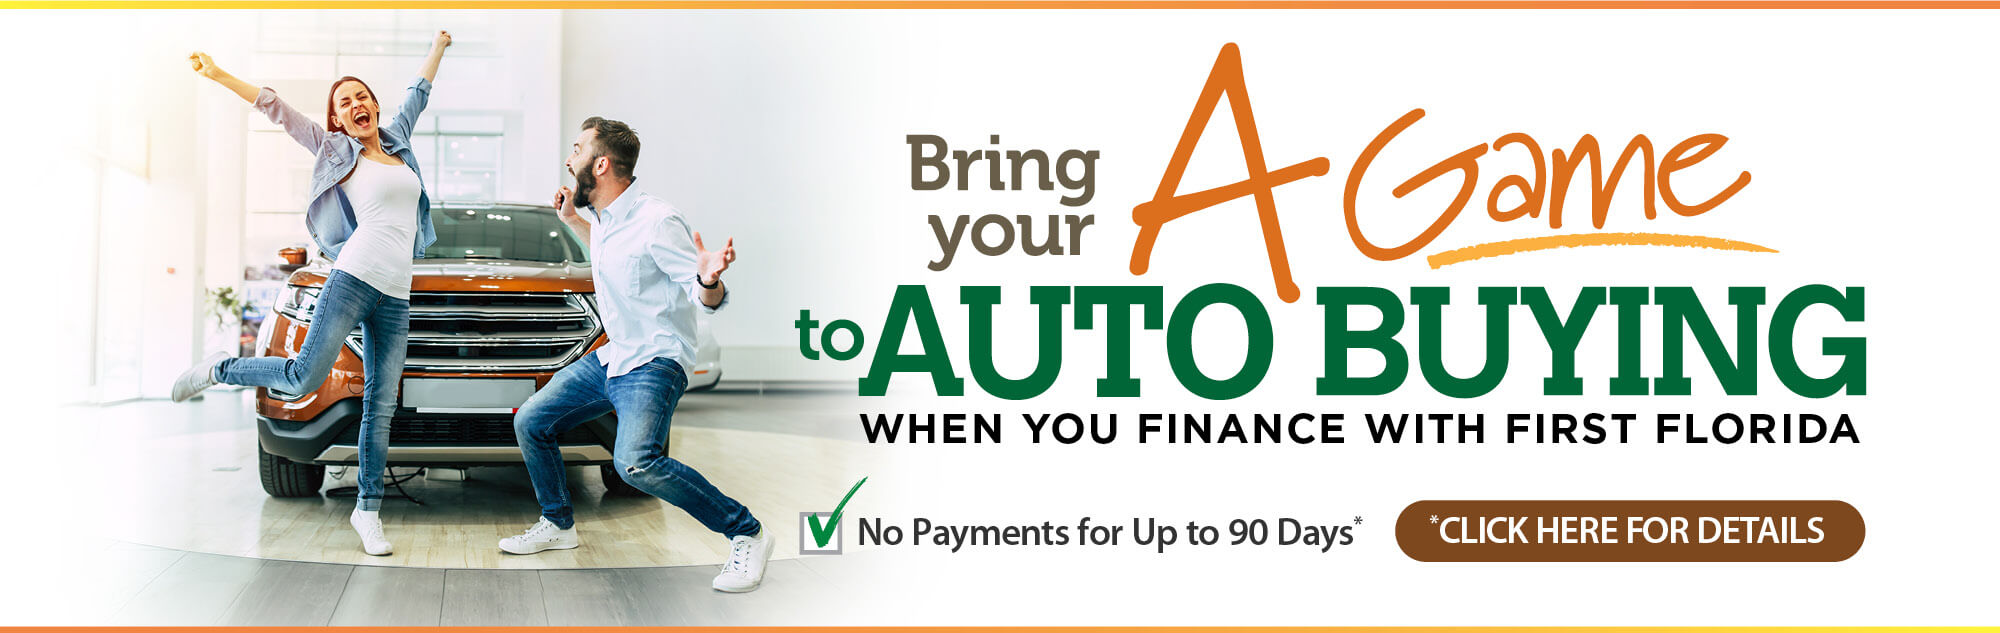 Bring your A game to Auto Buying when you finance with First Florida. No payments for up to 90 days. Click for details.